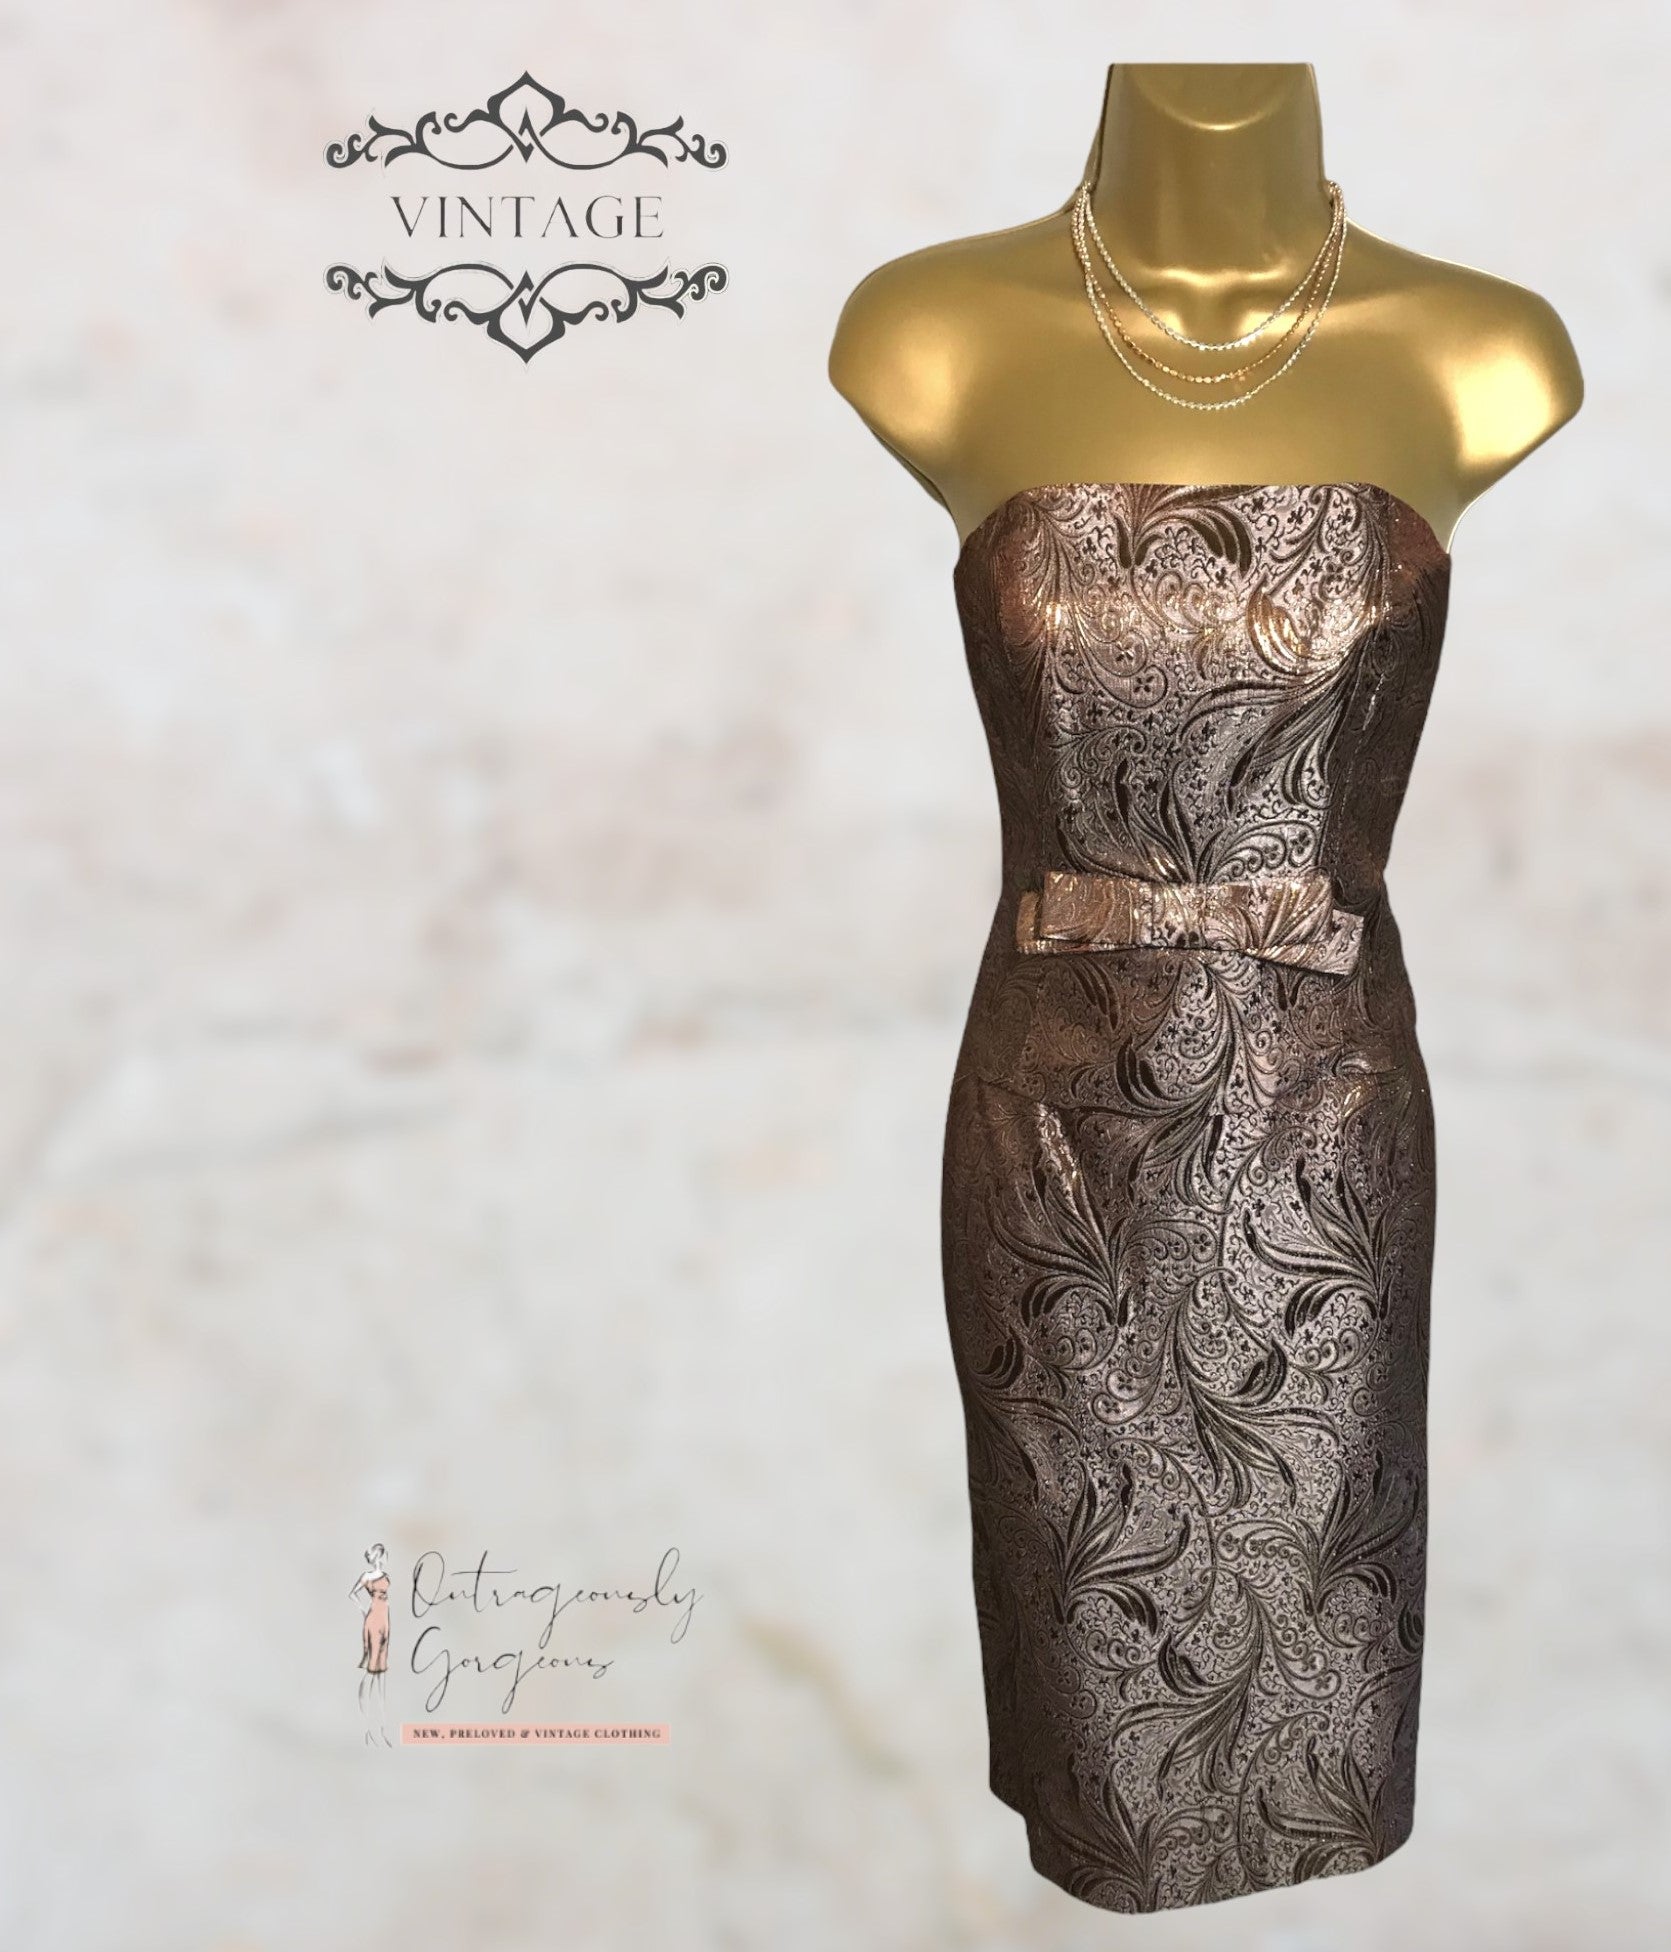 Next Bronze Gold Vintage Jacquard Metallic Special Occasion Outfit UK 8 US 6 EU 36 Timeless Fashions